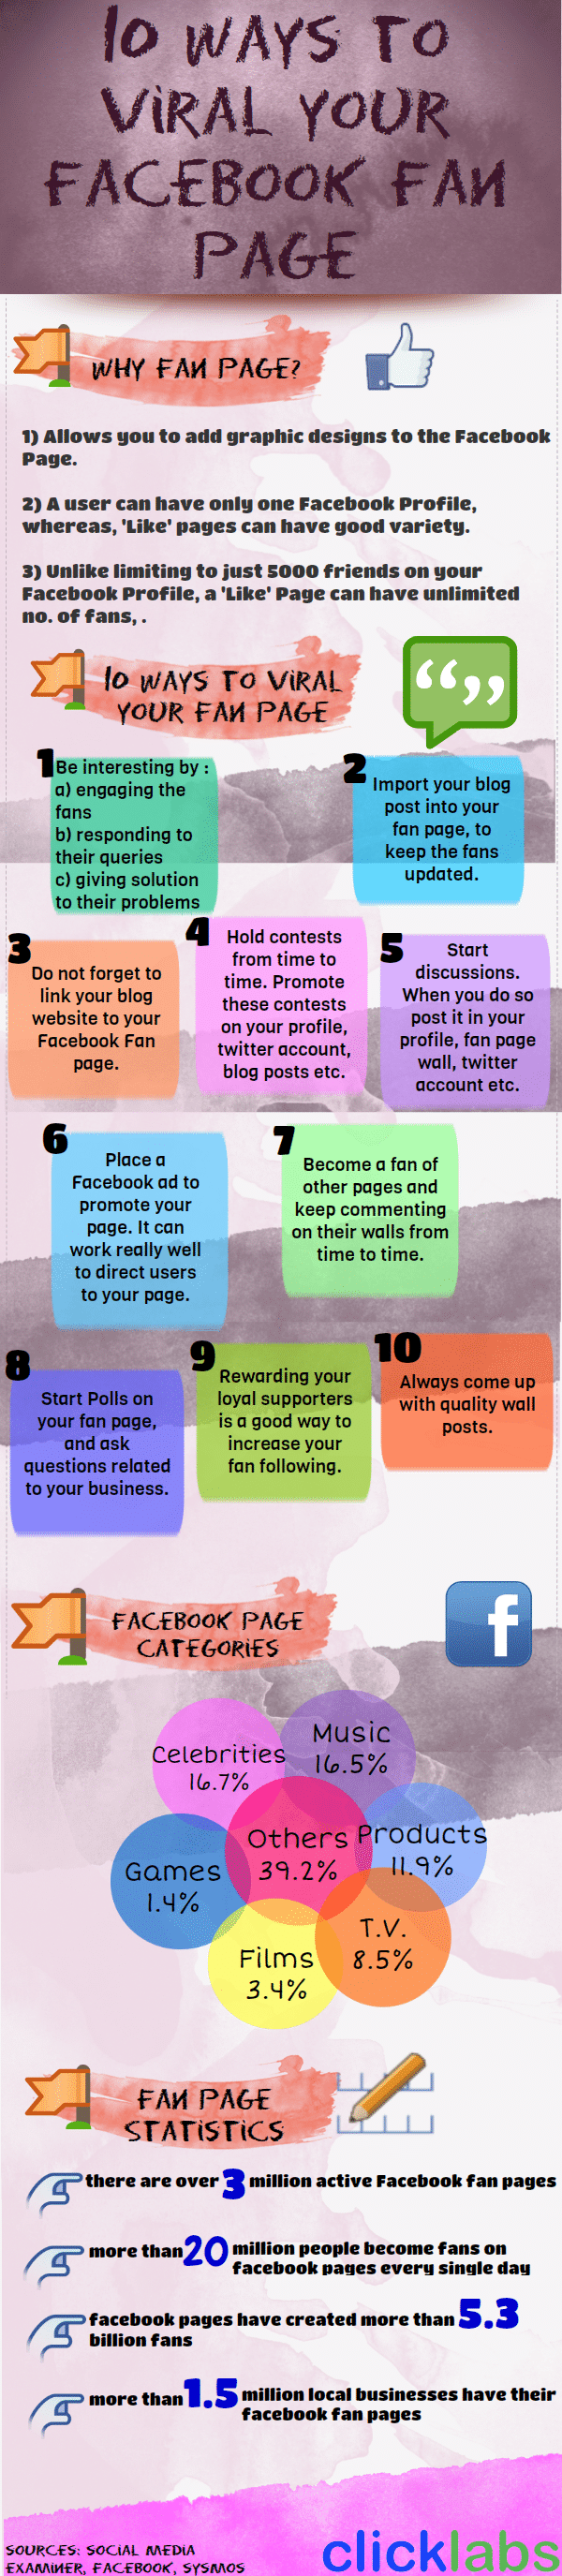 10 Ways To Make Your Facebook Page Go Viral [Infographic]